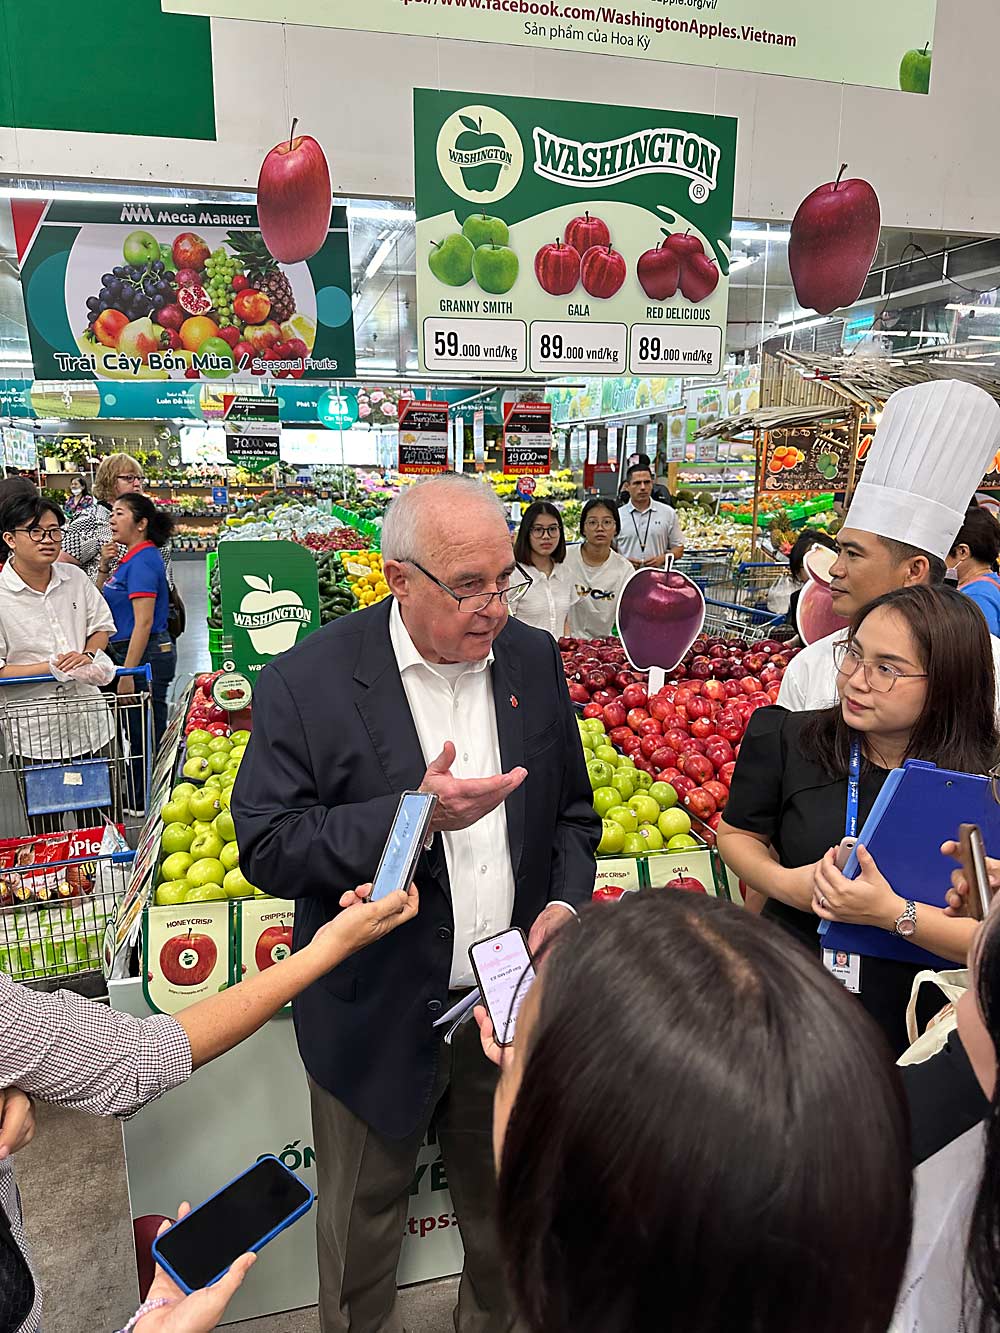 Derek Sandison, director of agriculture for the state of Washington, talks about the important trade relationship between Washington and Vietnam in front of a Washington Apple display at a MM Mega Market in the An Phu district of Vietnam on April 11. (Courtesy Washington State Department of Agriculture)